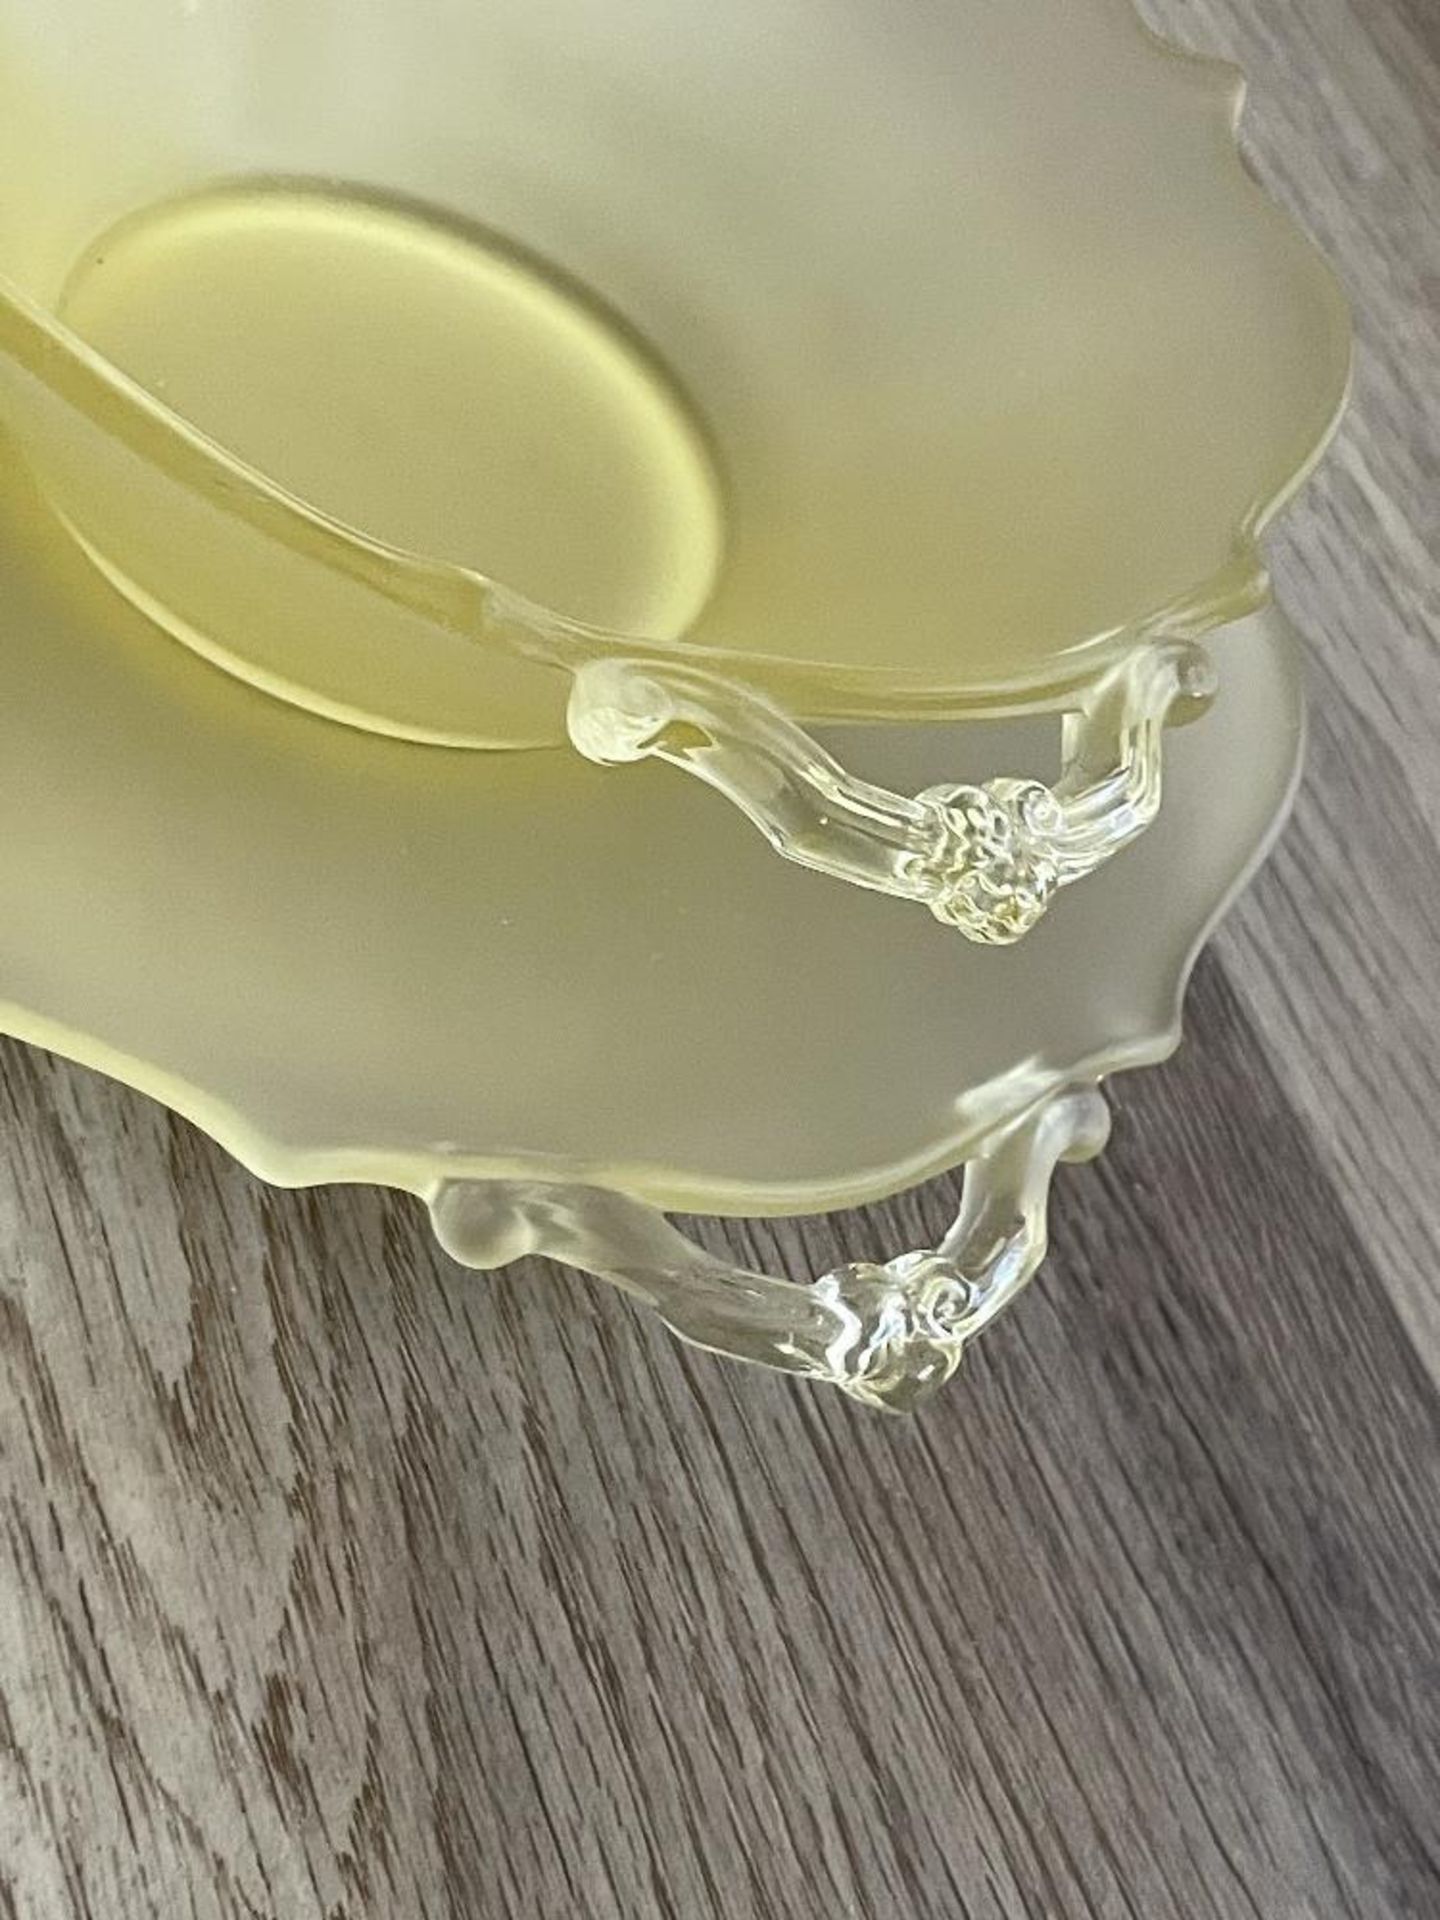 Yellow Depression Era Glass Serving Bowl and Plate - Image 3 of 4